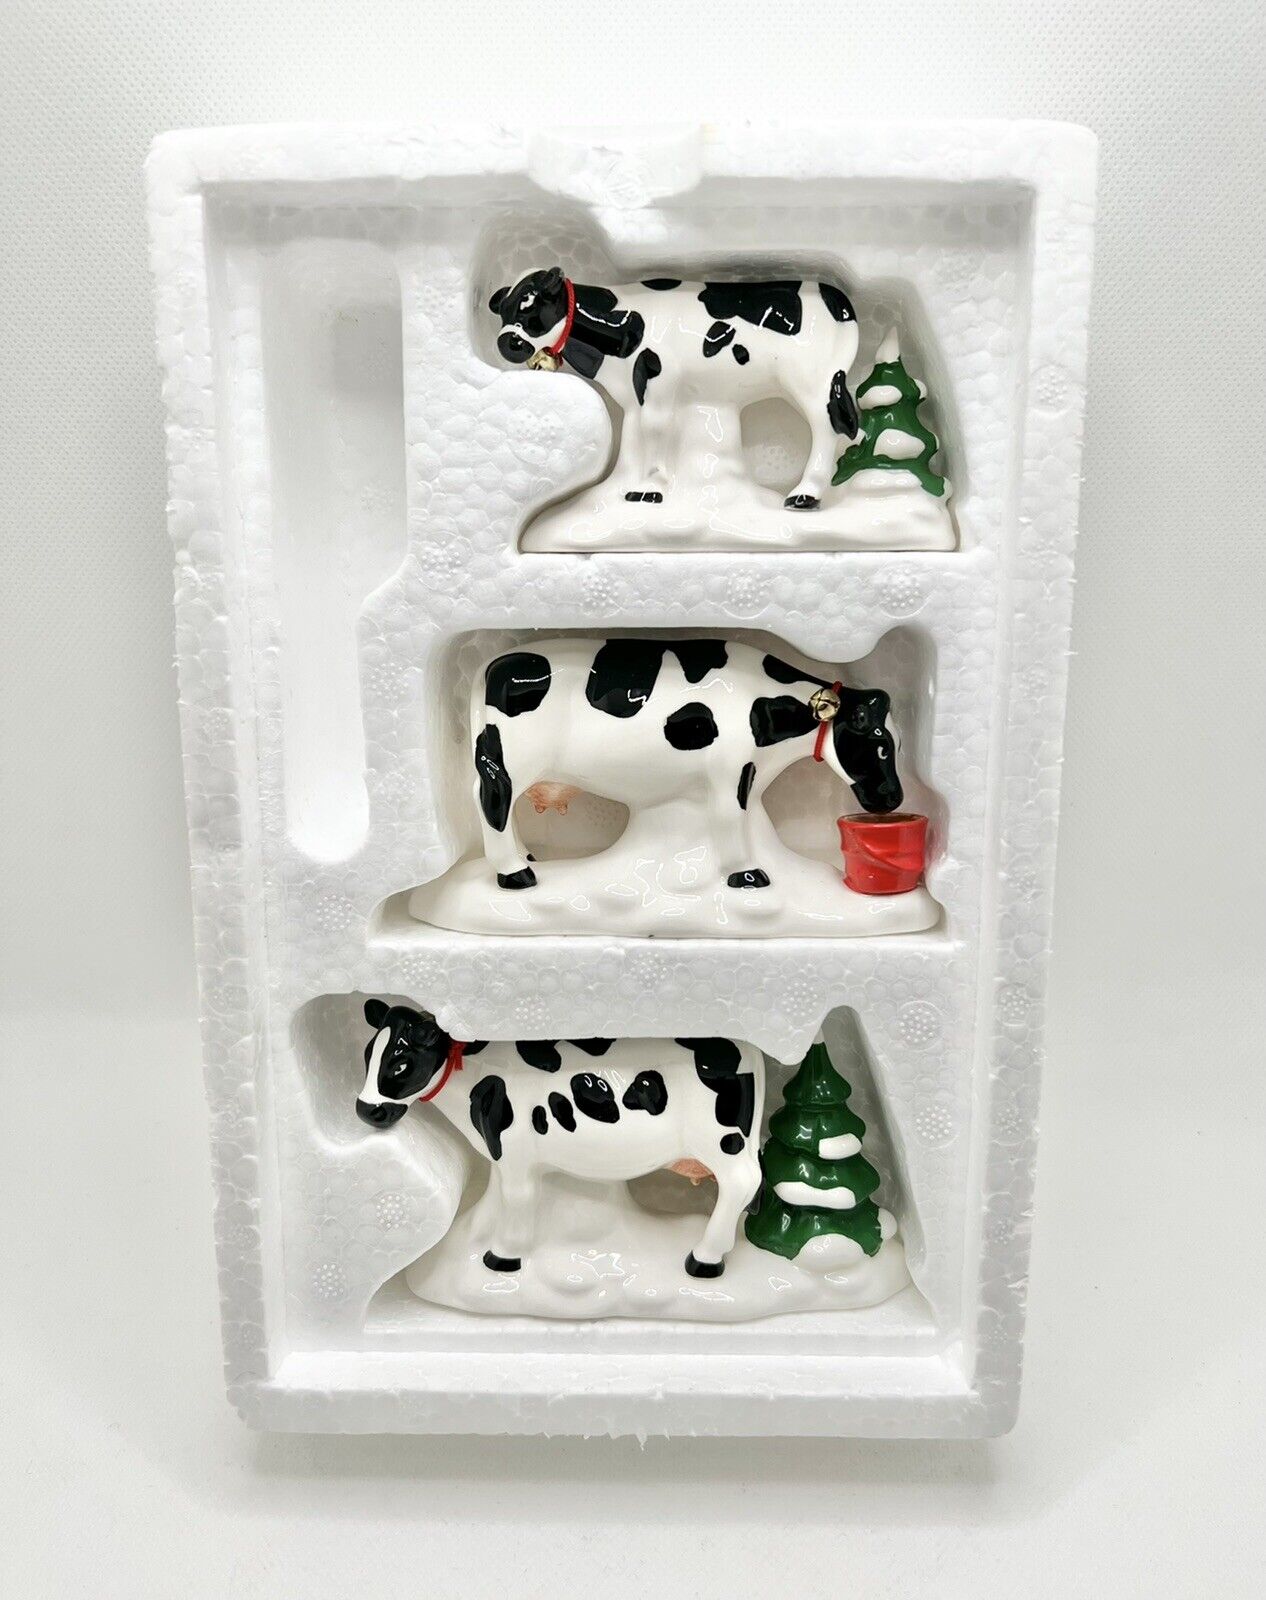 Dept 56 Snow Village Accessory 1993 A HERD OF HOLIDAY HEIFERS 3 Pc 54550 Retired